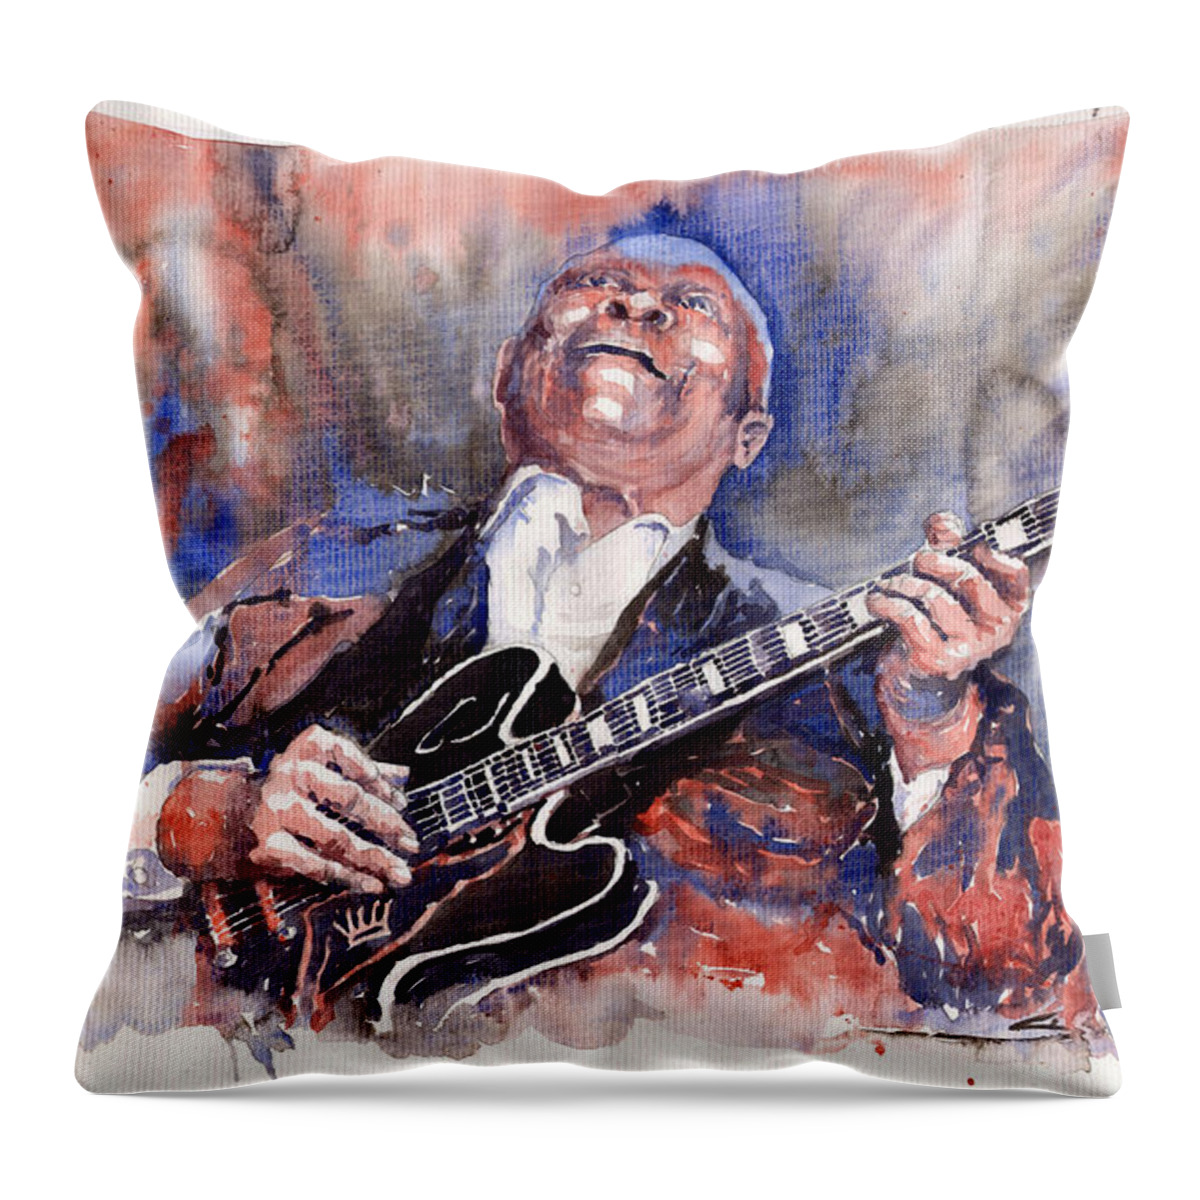 Jazz Throw Pillow featuring the painting Jazz B B King 05 Red a by Yuriy Shevchuk